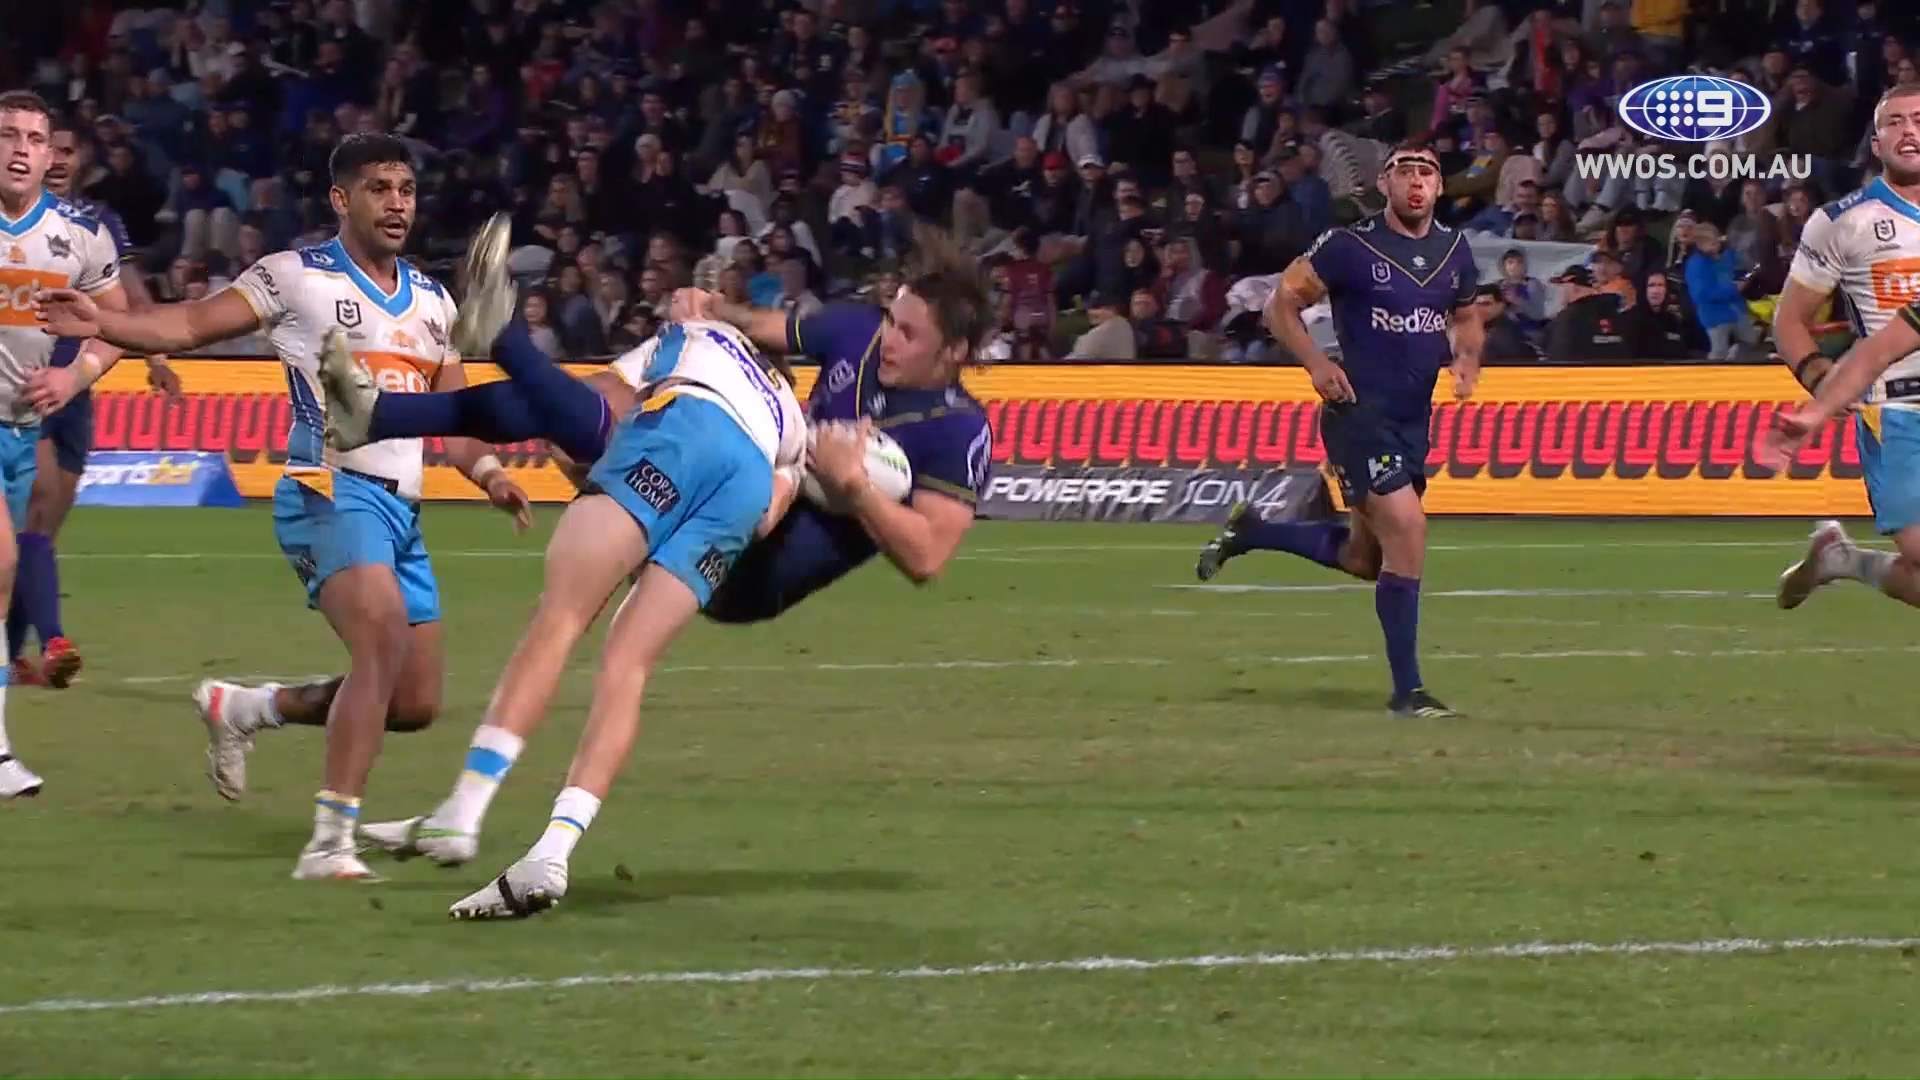 NRL Highlights: The Storm edges the Titans in last seconds - Round 13